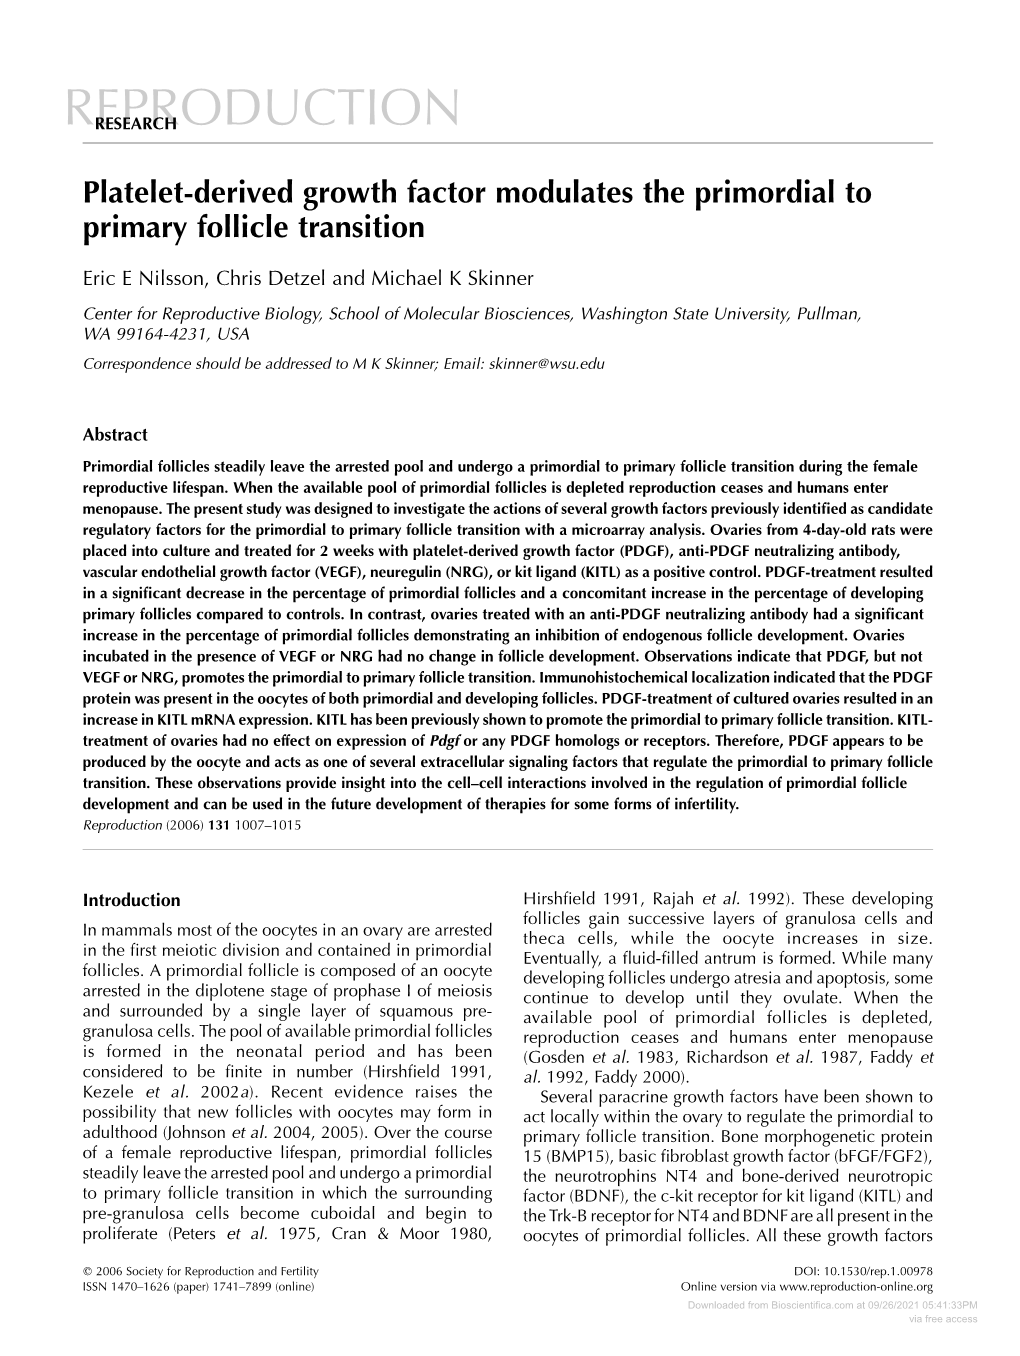 Platelet-Derived Growth Factor Modulates the Primordial to Primary Follicle Transition